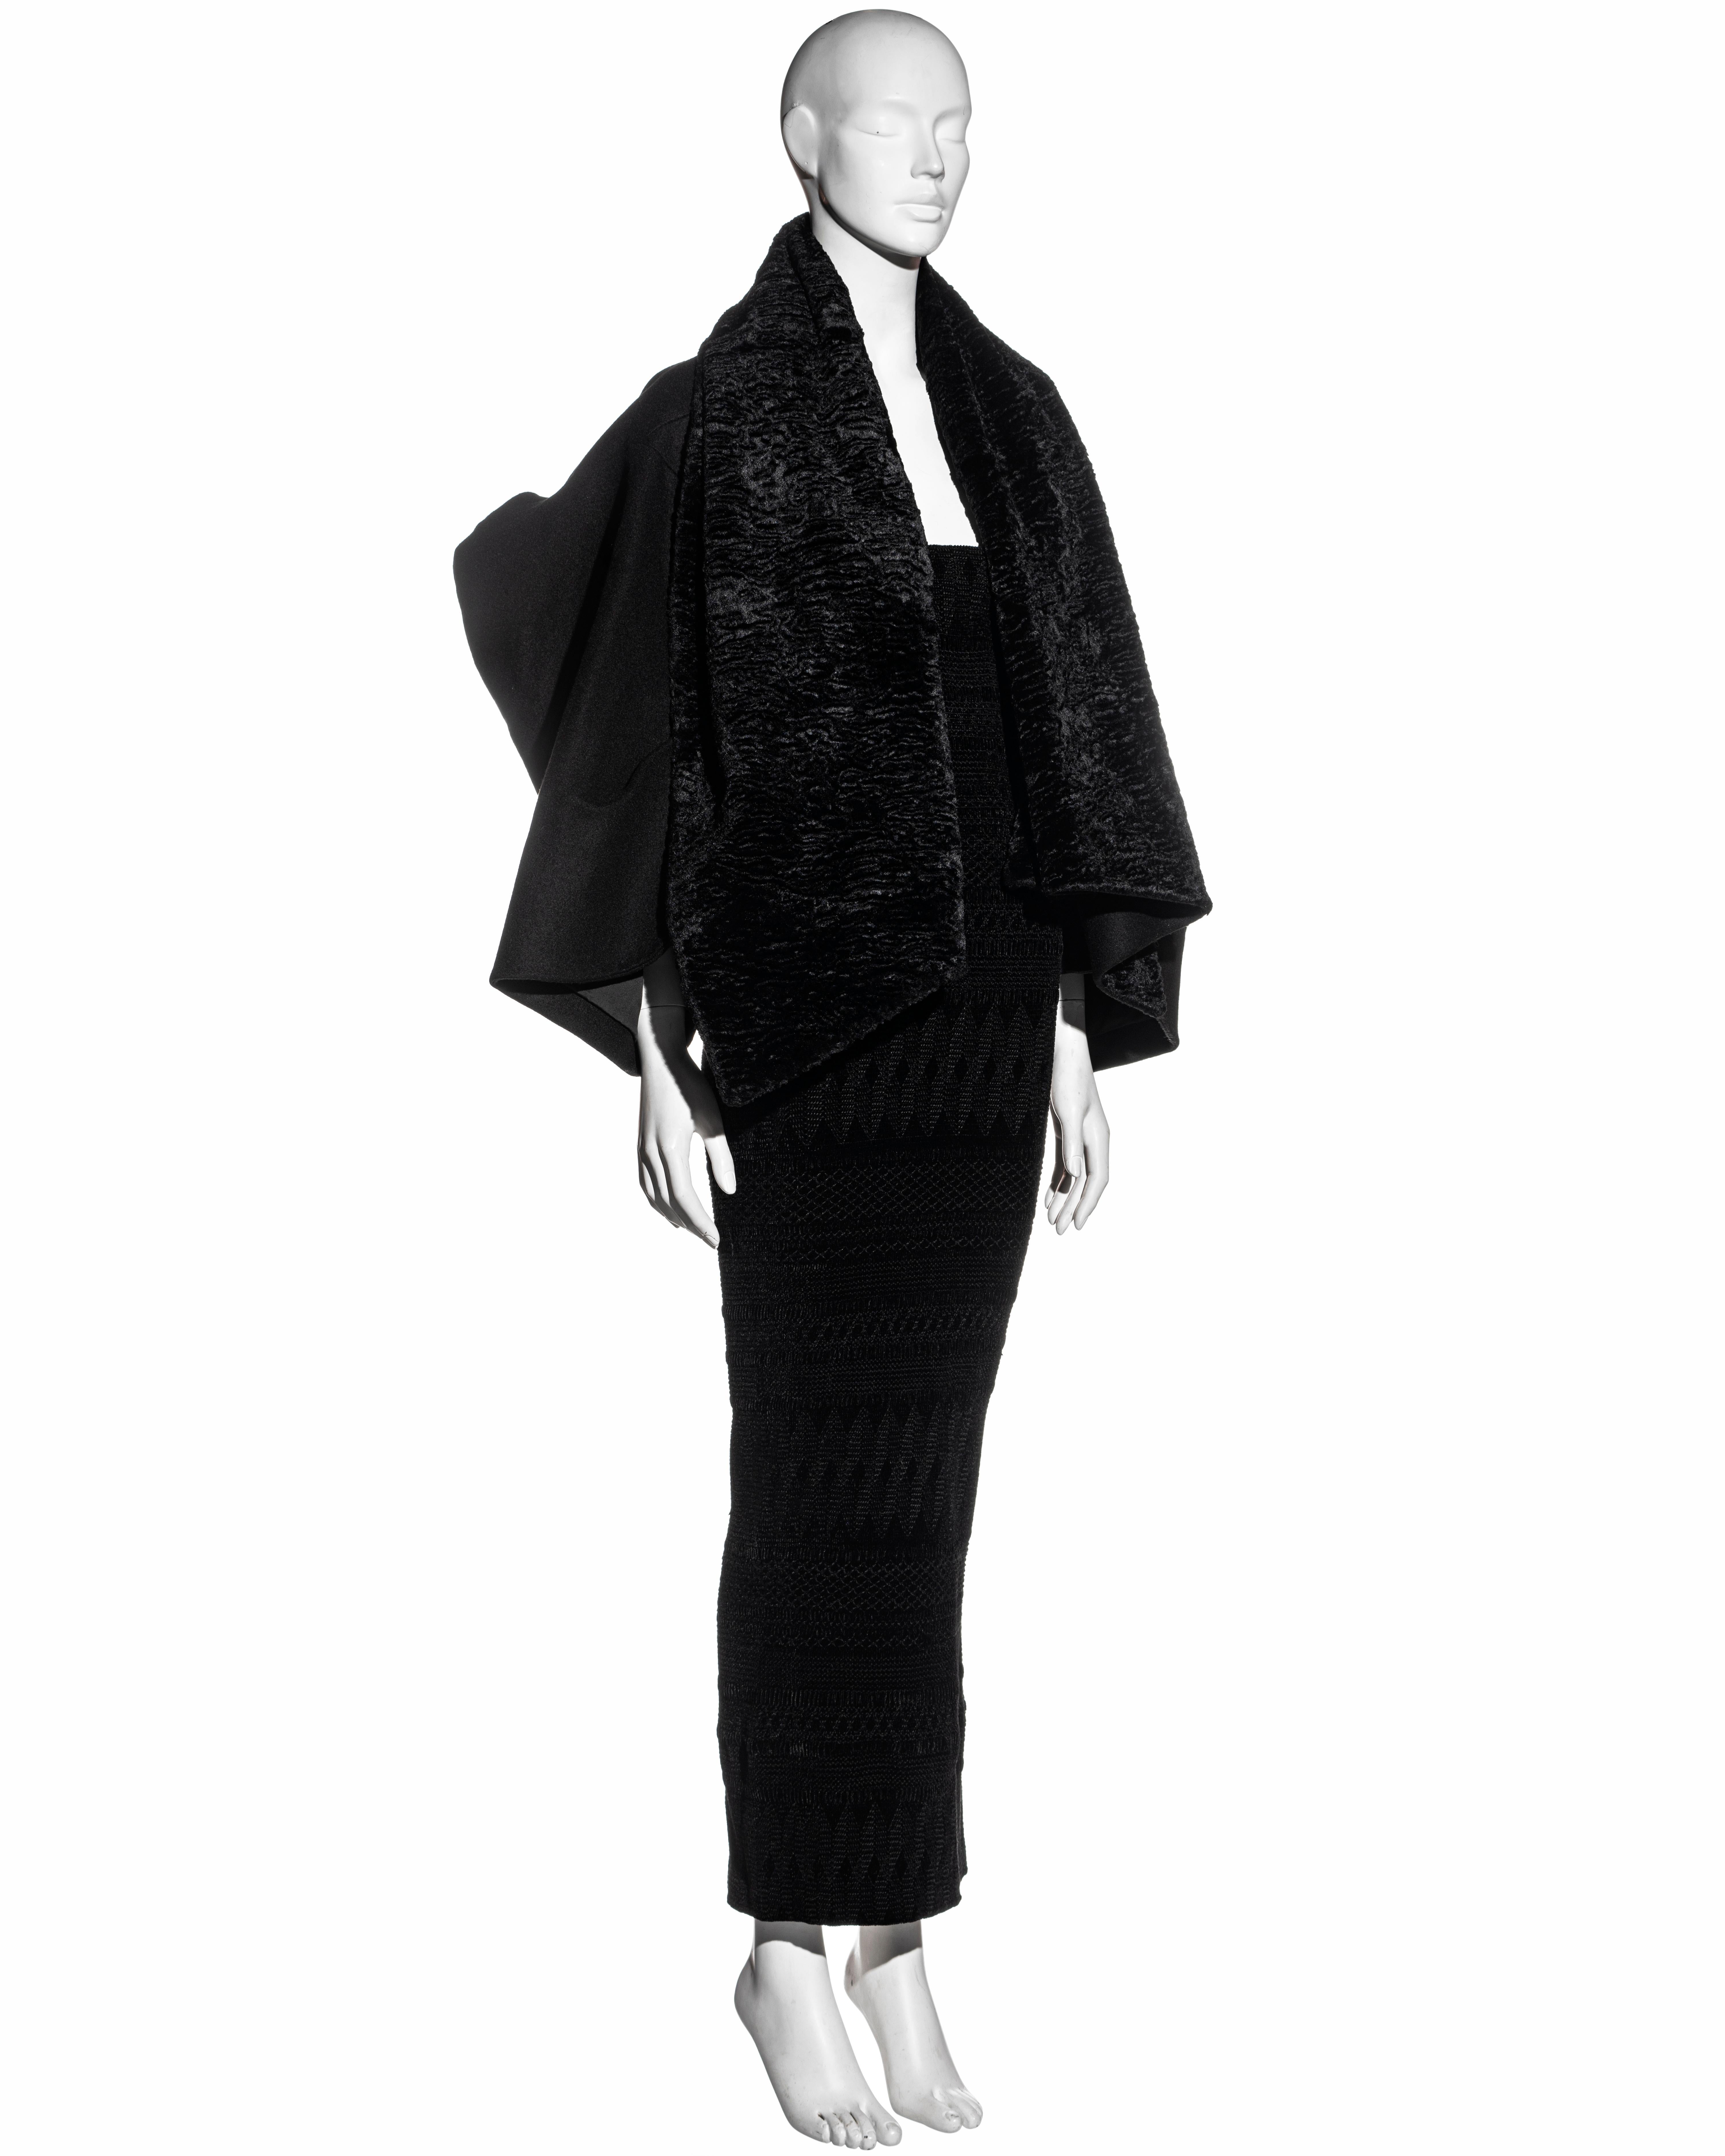 ▪ John Galliano evening ensemble 
▪ Black wool upside down cropped opera coat 
▪ Heavyweight wool 
▪ Broad chenille collar embroidered to imitate astrakhan fur 
▪ Shorter back 
▪ Silk lining  
▪ Embroidered chenille strapless sheath dress 
▪